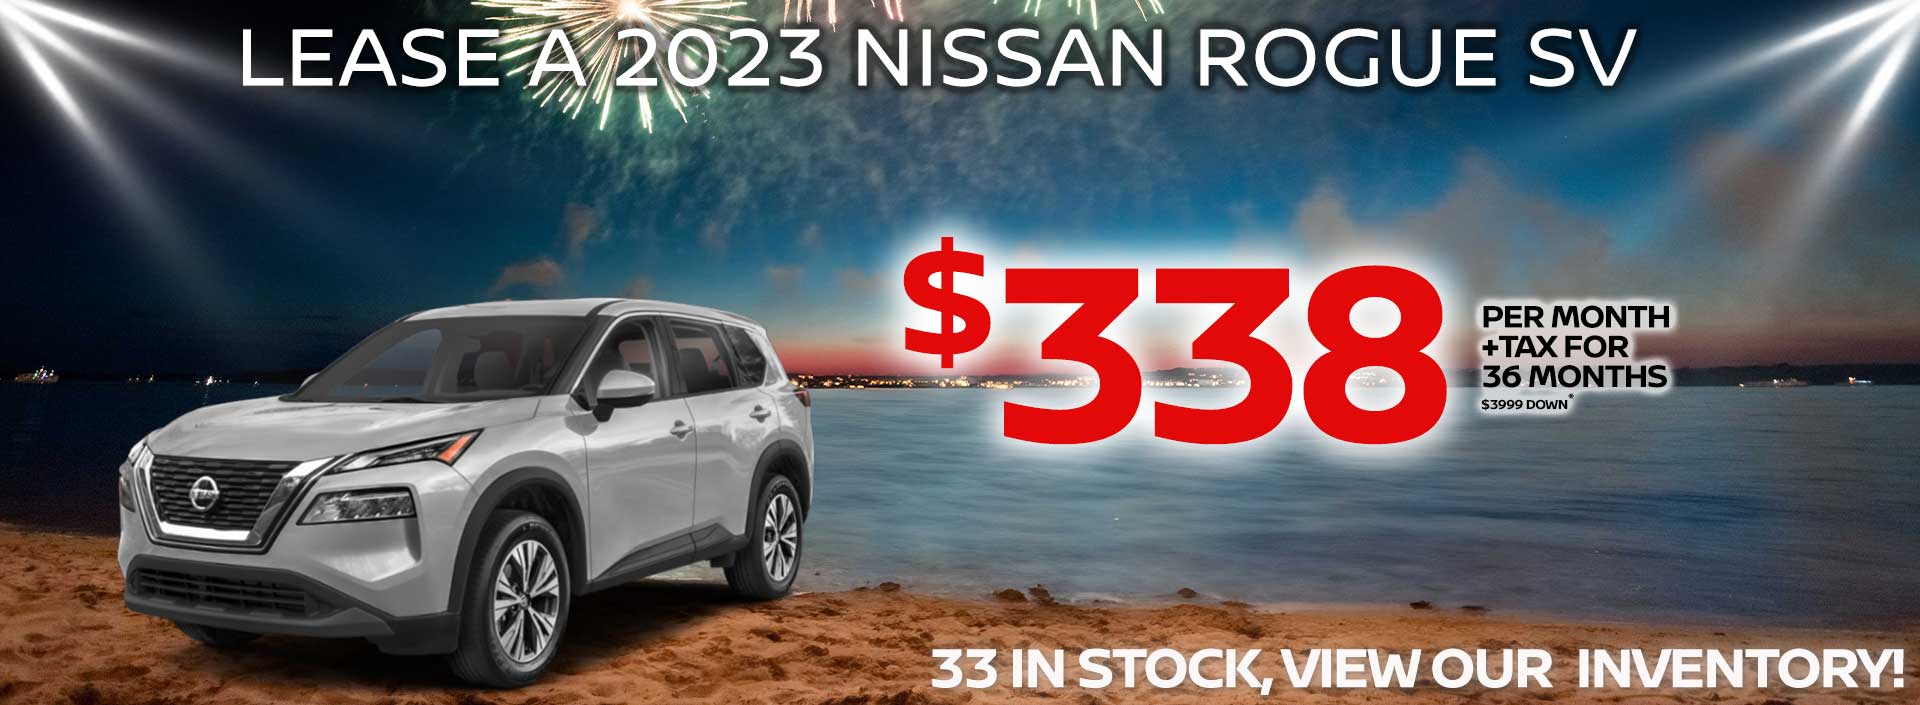 Interested in Leasing a Nissan Rogue? Here's What You Need to Know